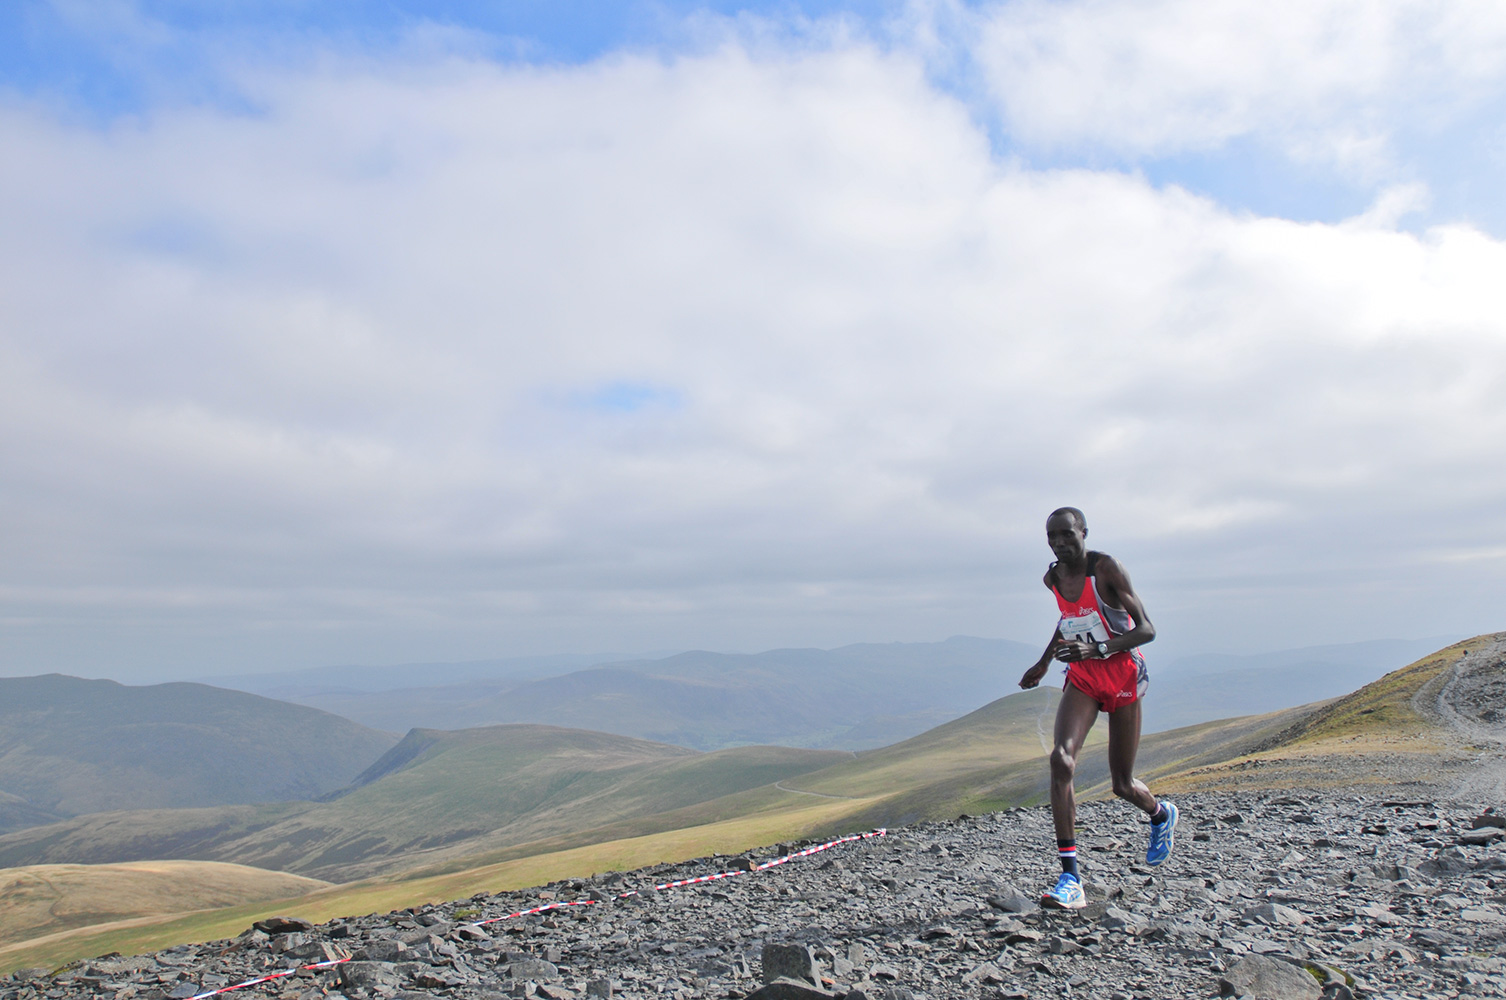 Keswick, Cumbria, September 2009Wilson Chemweno of Kenya rruising to victory and his first gold medal in the men's up-hill race on the summit of Skiddaw